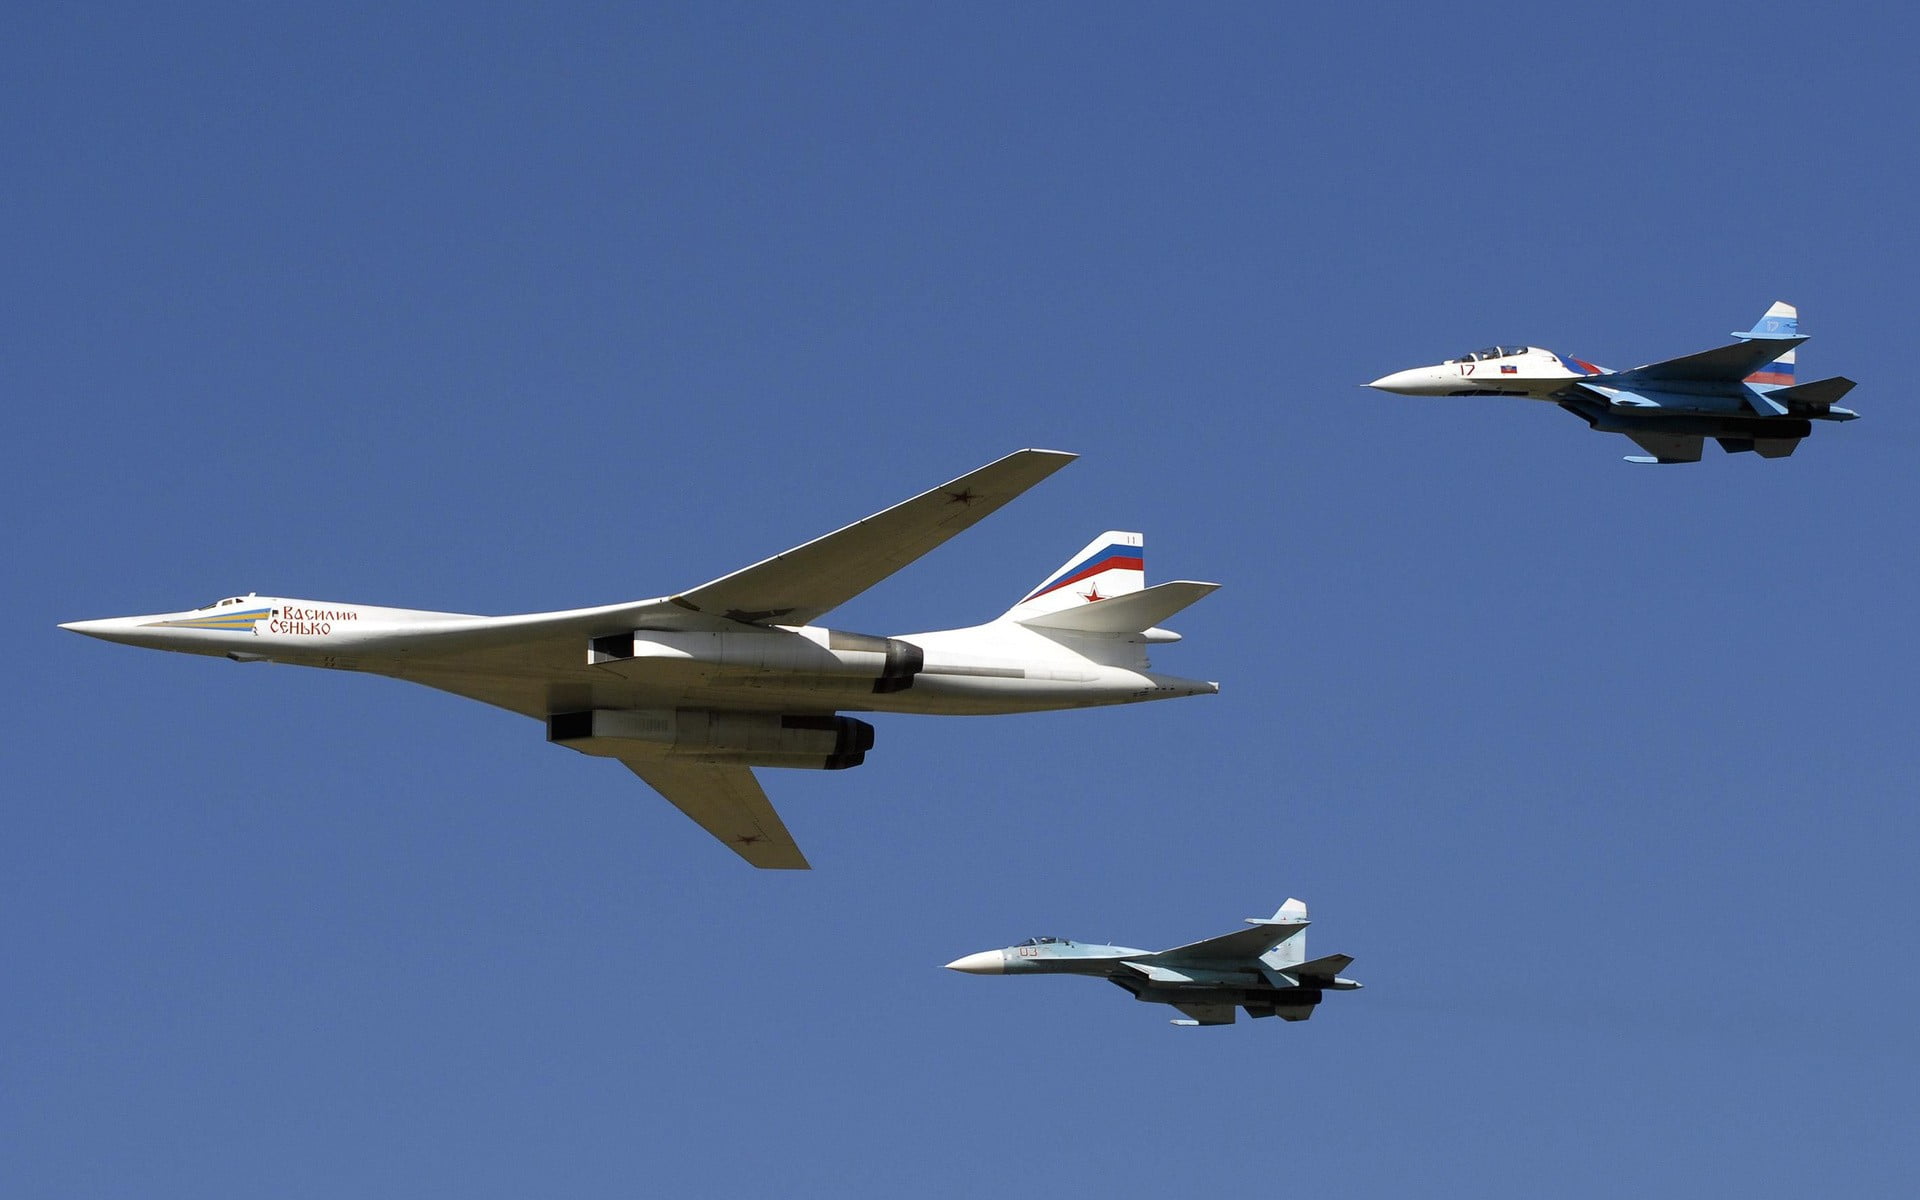 three beige and blue fighter jets, Tupolev Tu-160, aircraft, military aircraft, jet fighter